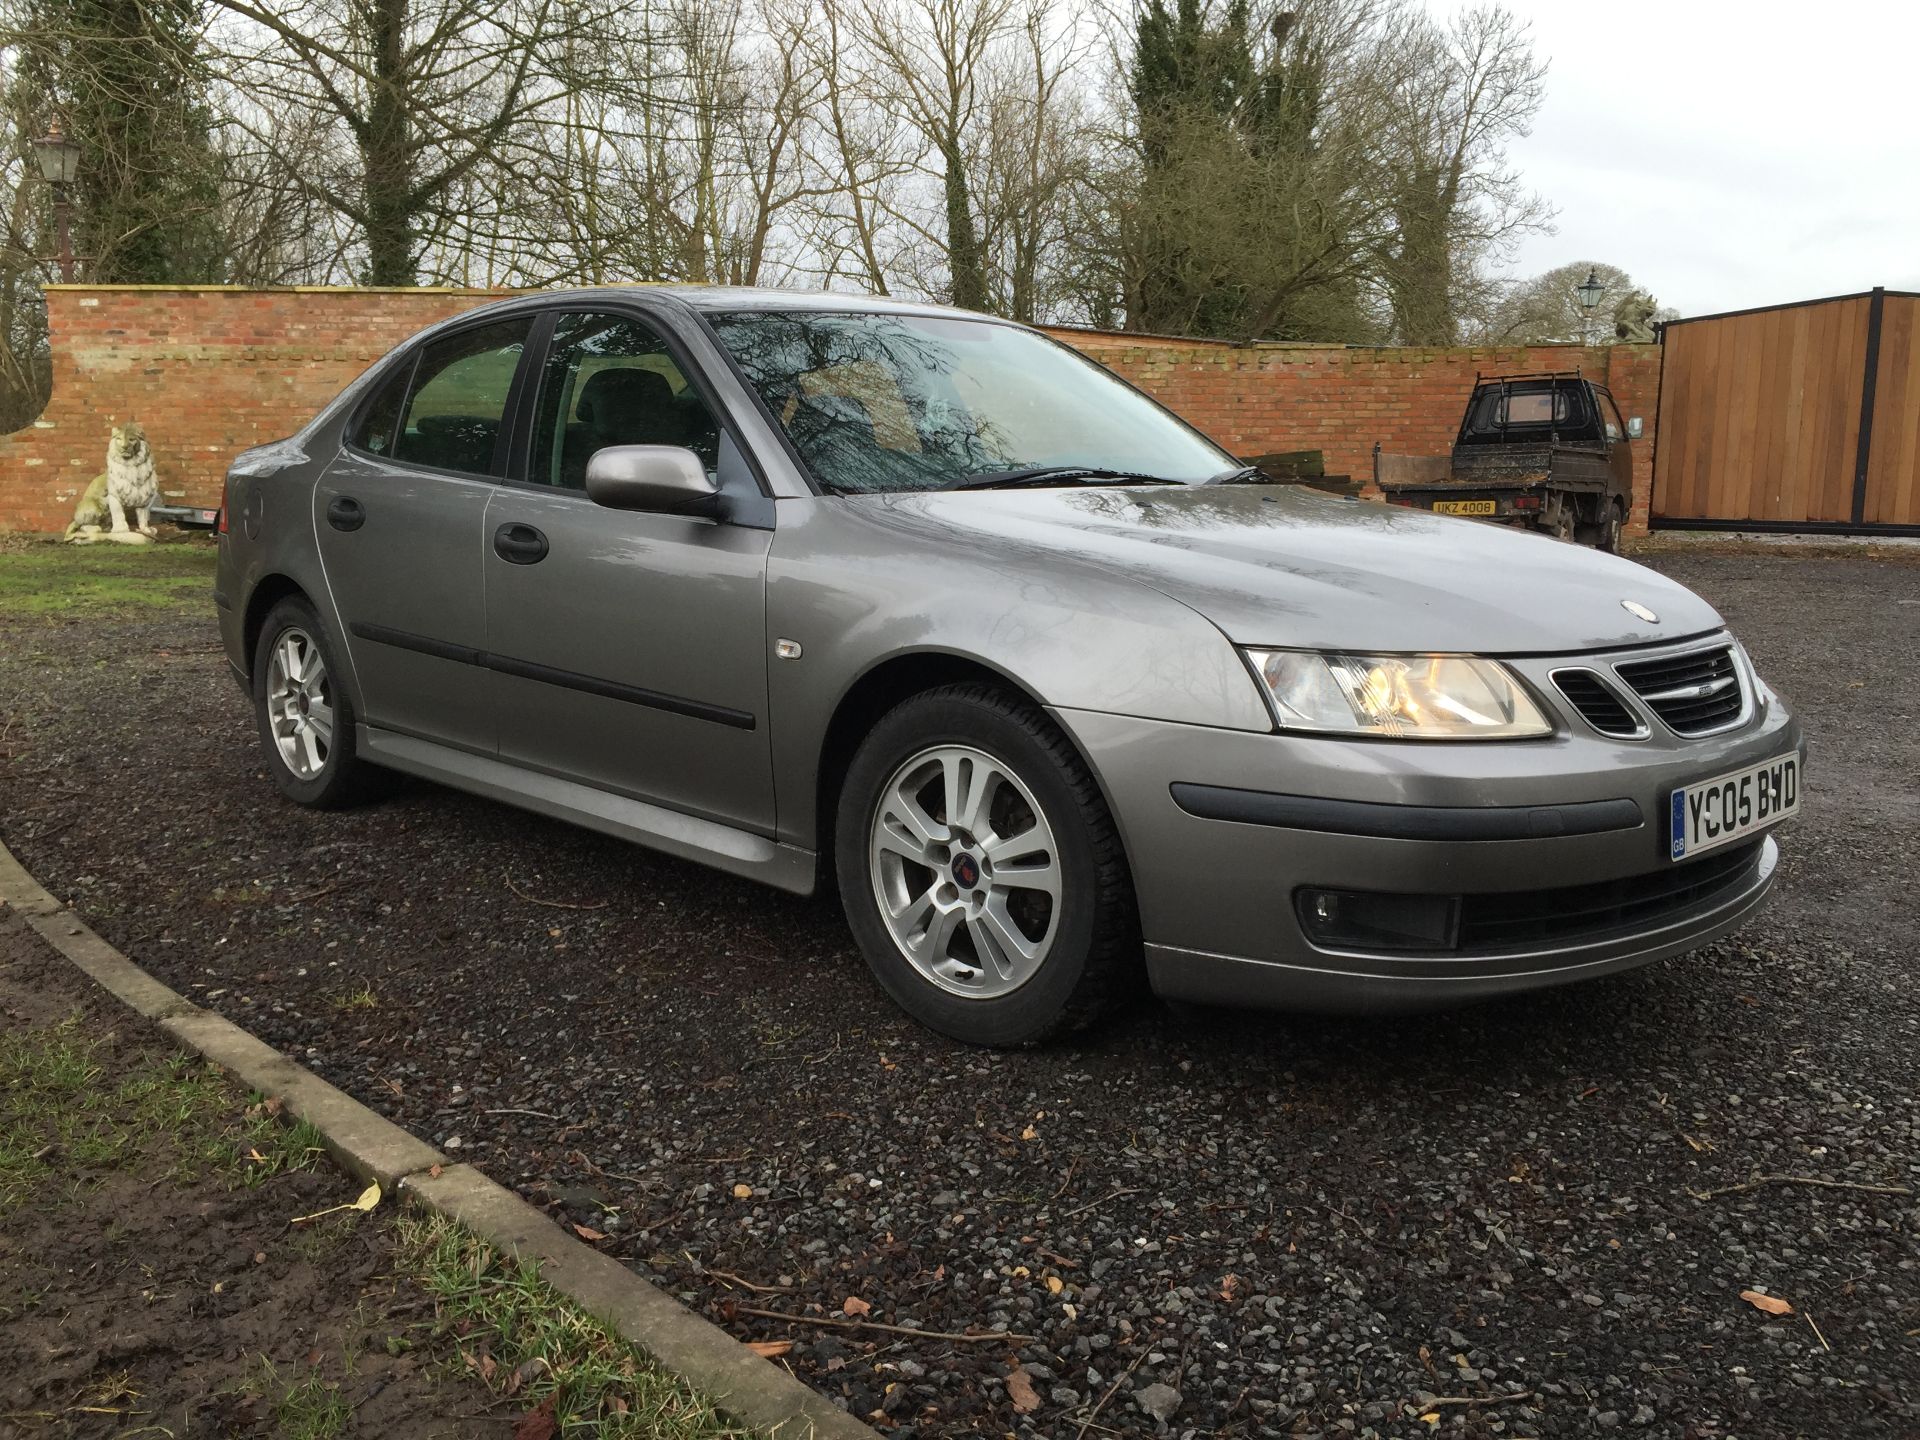 SAAB 93 LINEAR SPORT A-FLOW TiD 1.9 TD - LOW MILEAGE - SOLD WITH A TRIAL - Image 2 of 12